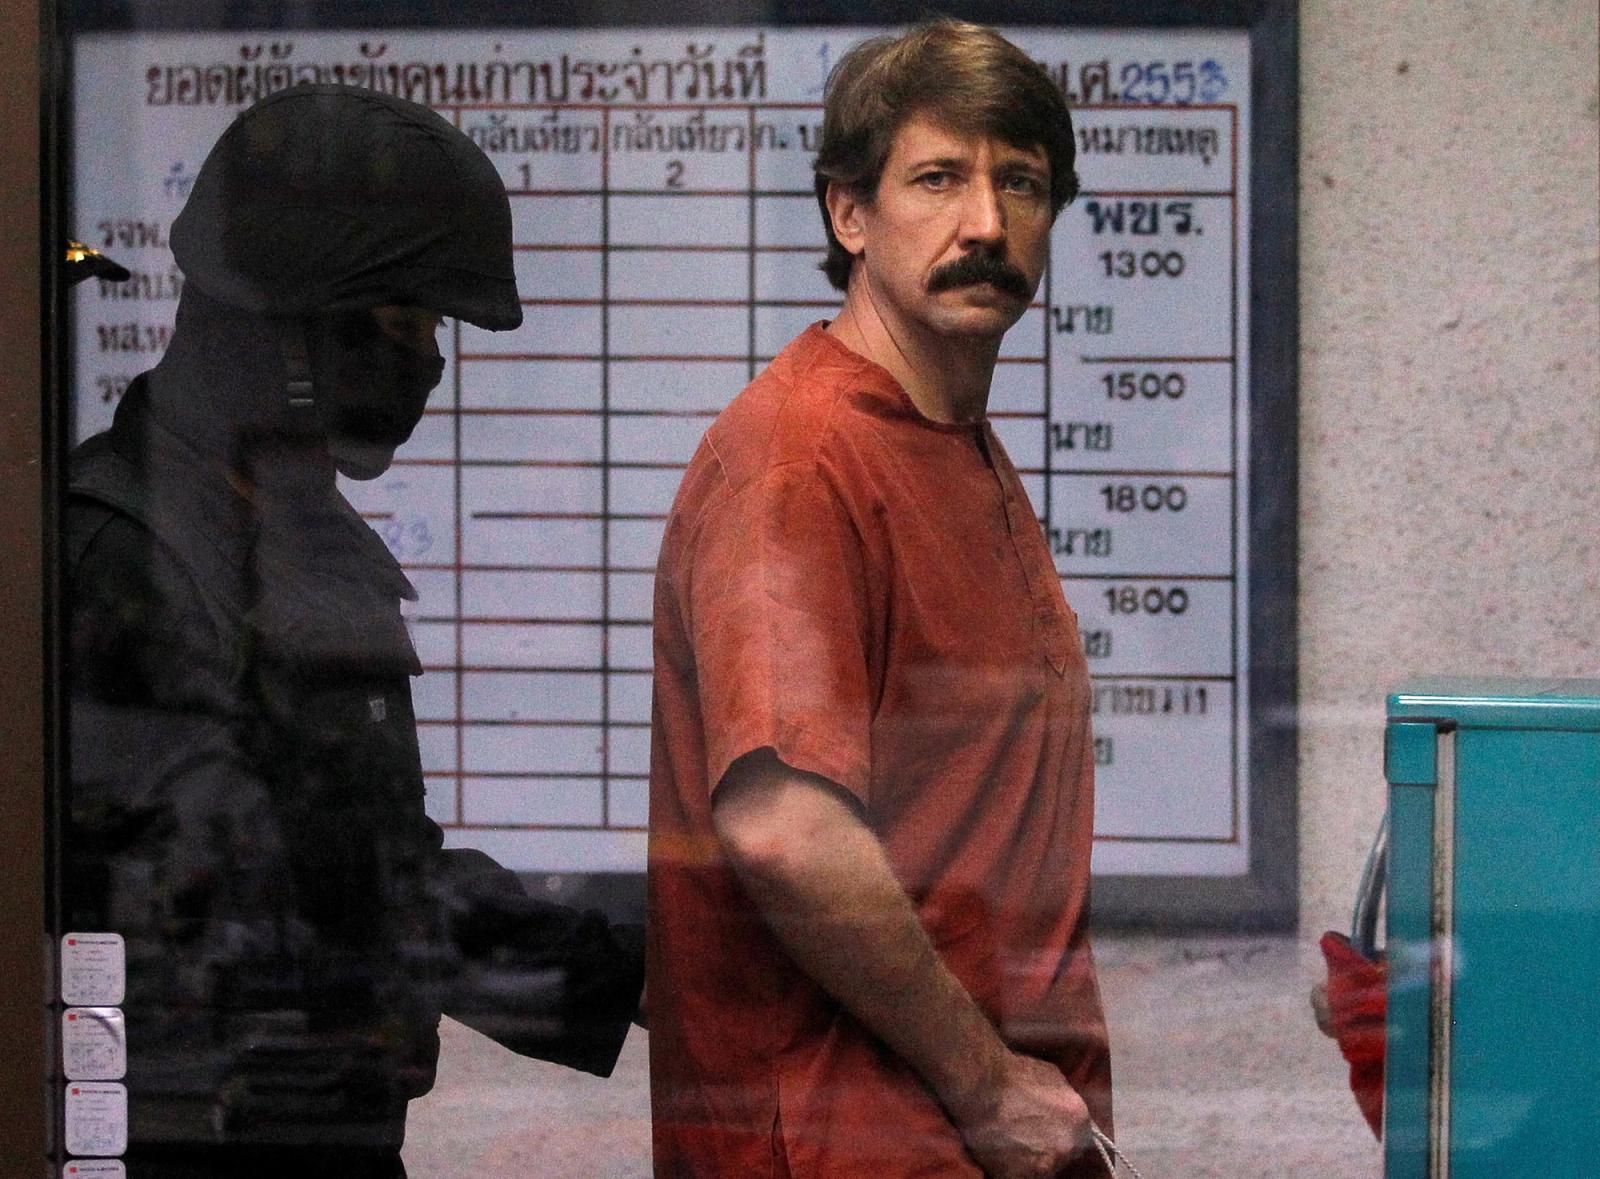 Alleged arms smuggler Viktor Bout from Russia is escorted by a member of the special police unit as he arrives at a criminal court in Bangkok October 4, 2010.